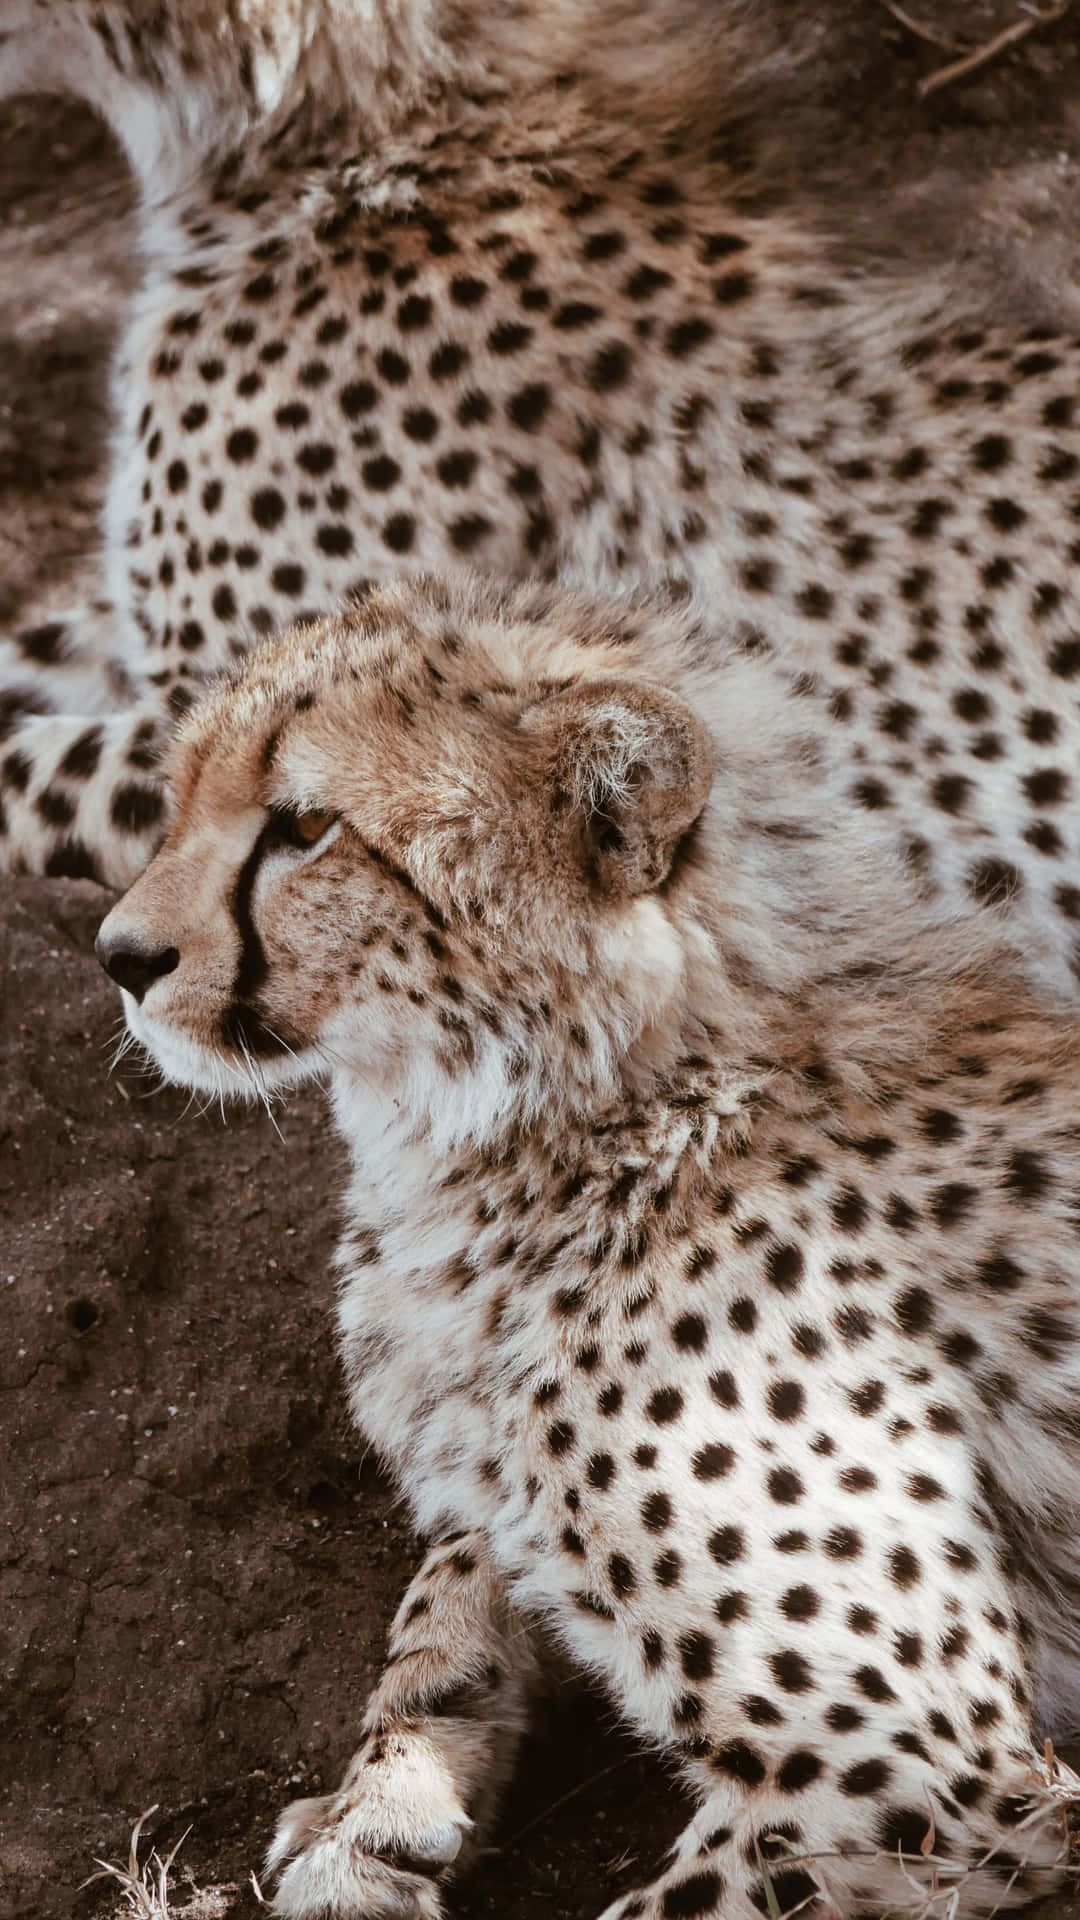 Give your smartphone a wild makeover with this cheetah iPhone wallpaper Wallpaper